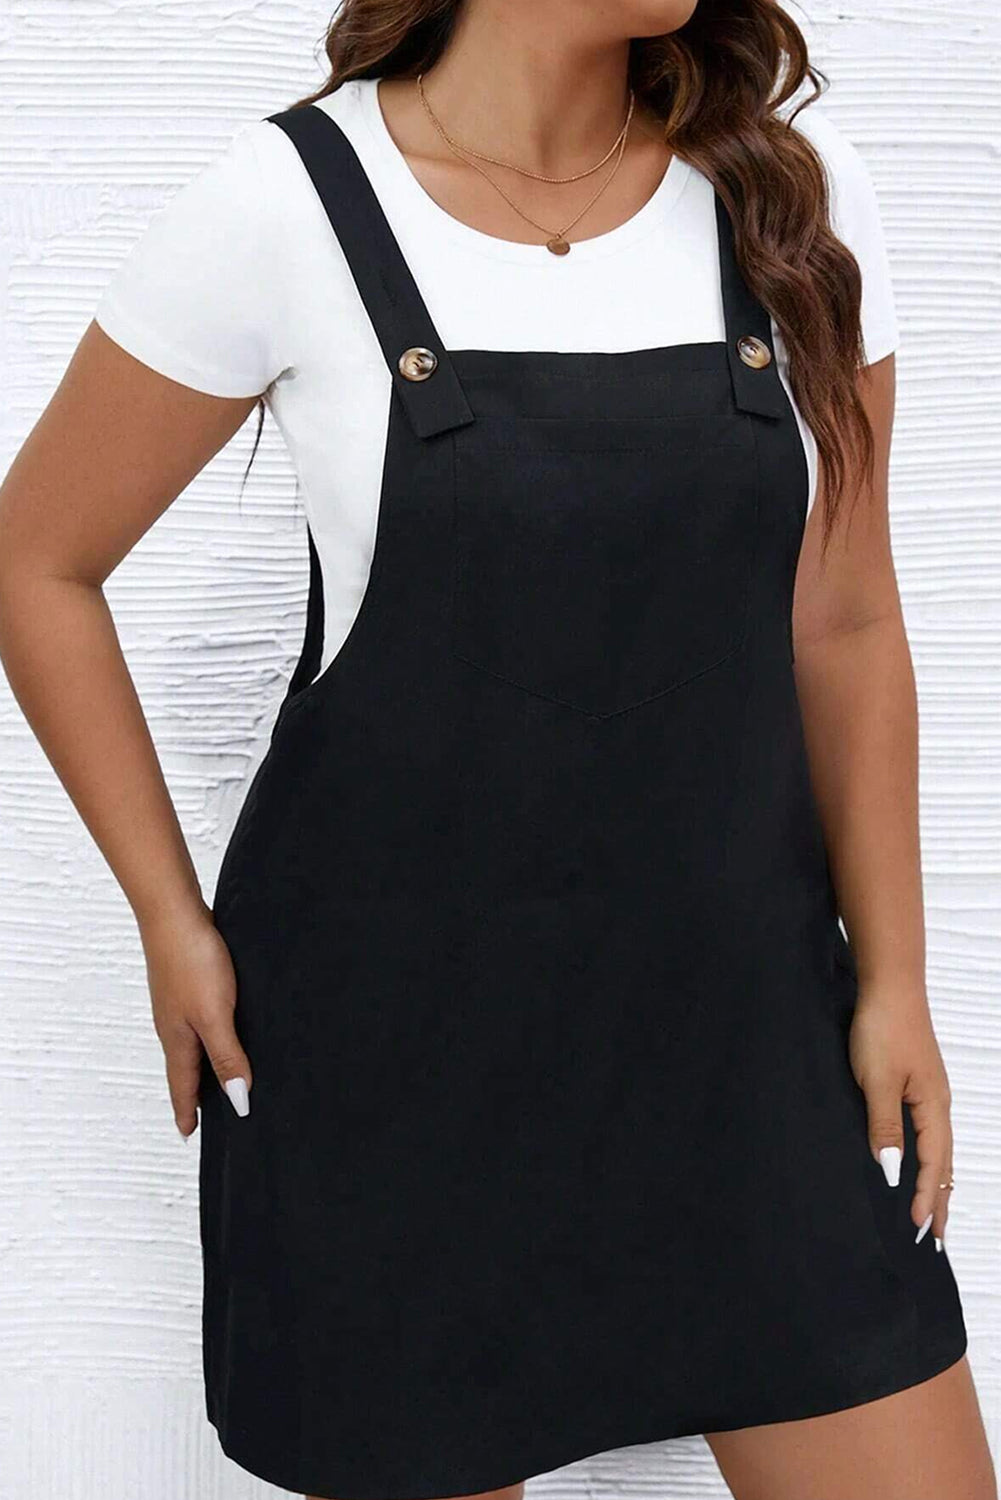 Black Solid Overall Dress - Plus